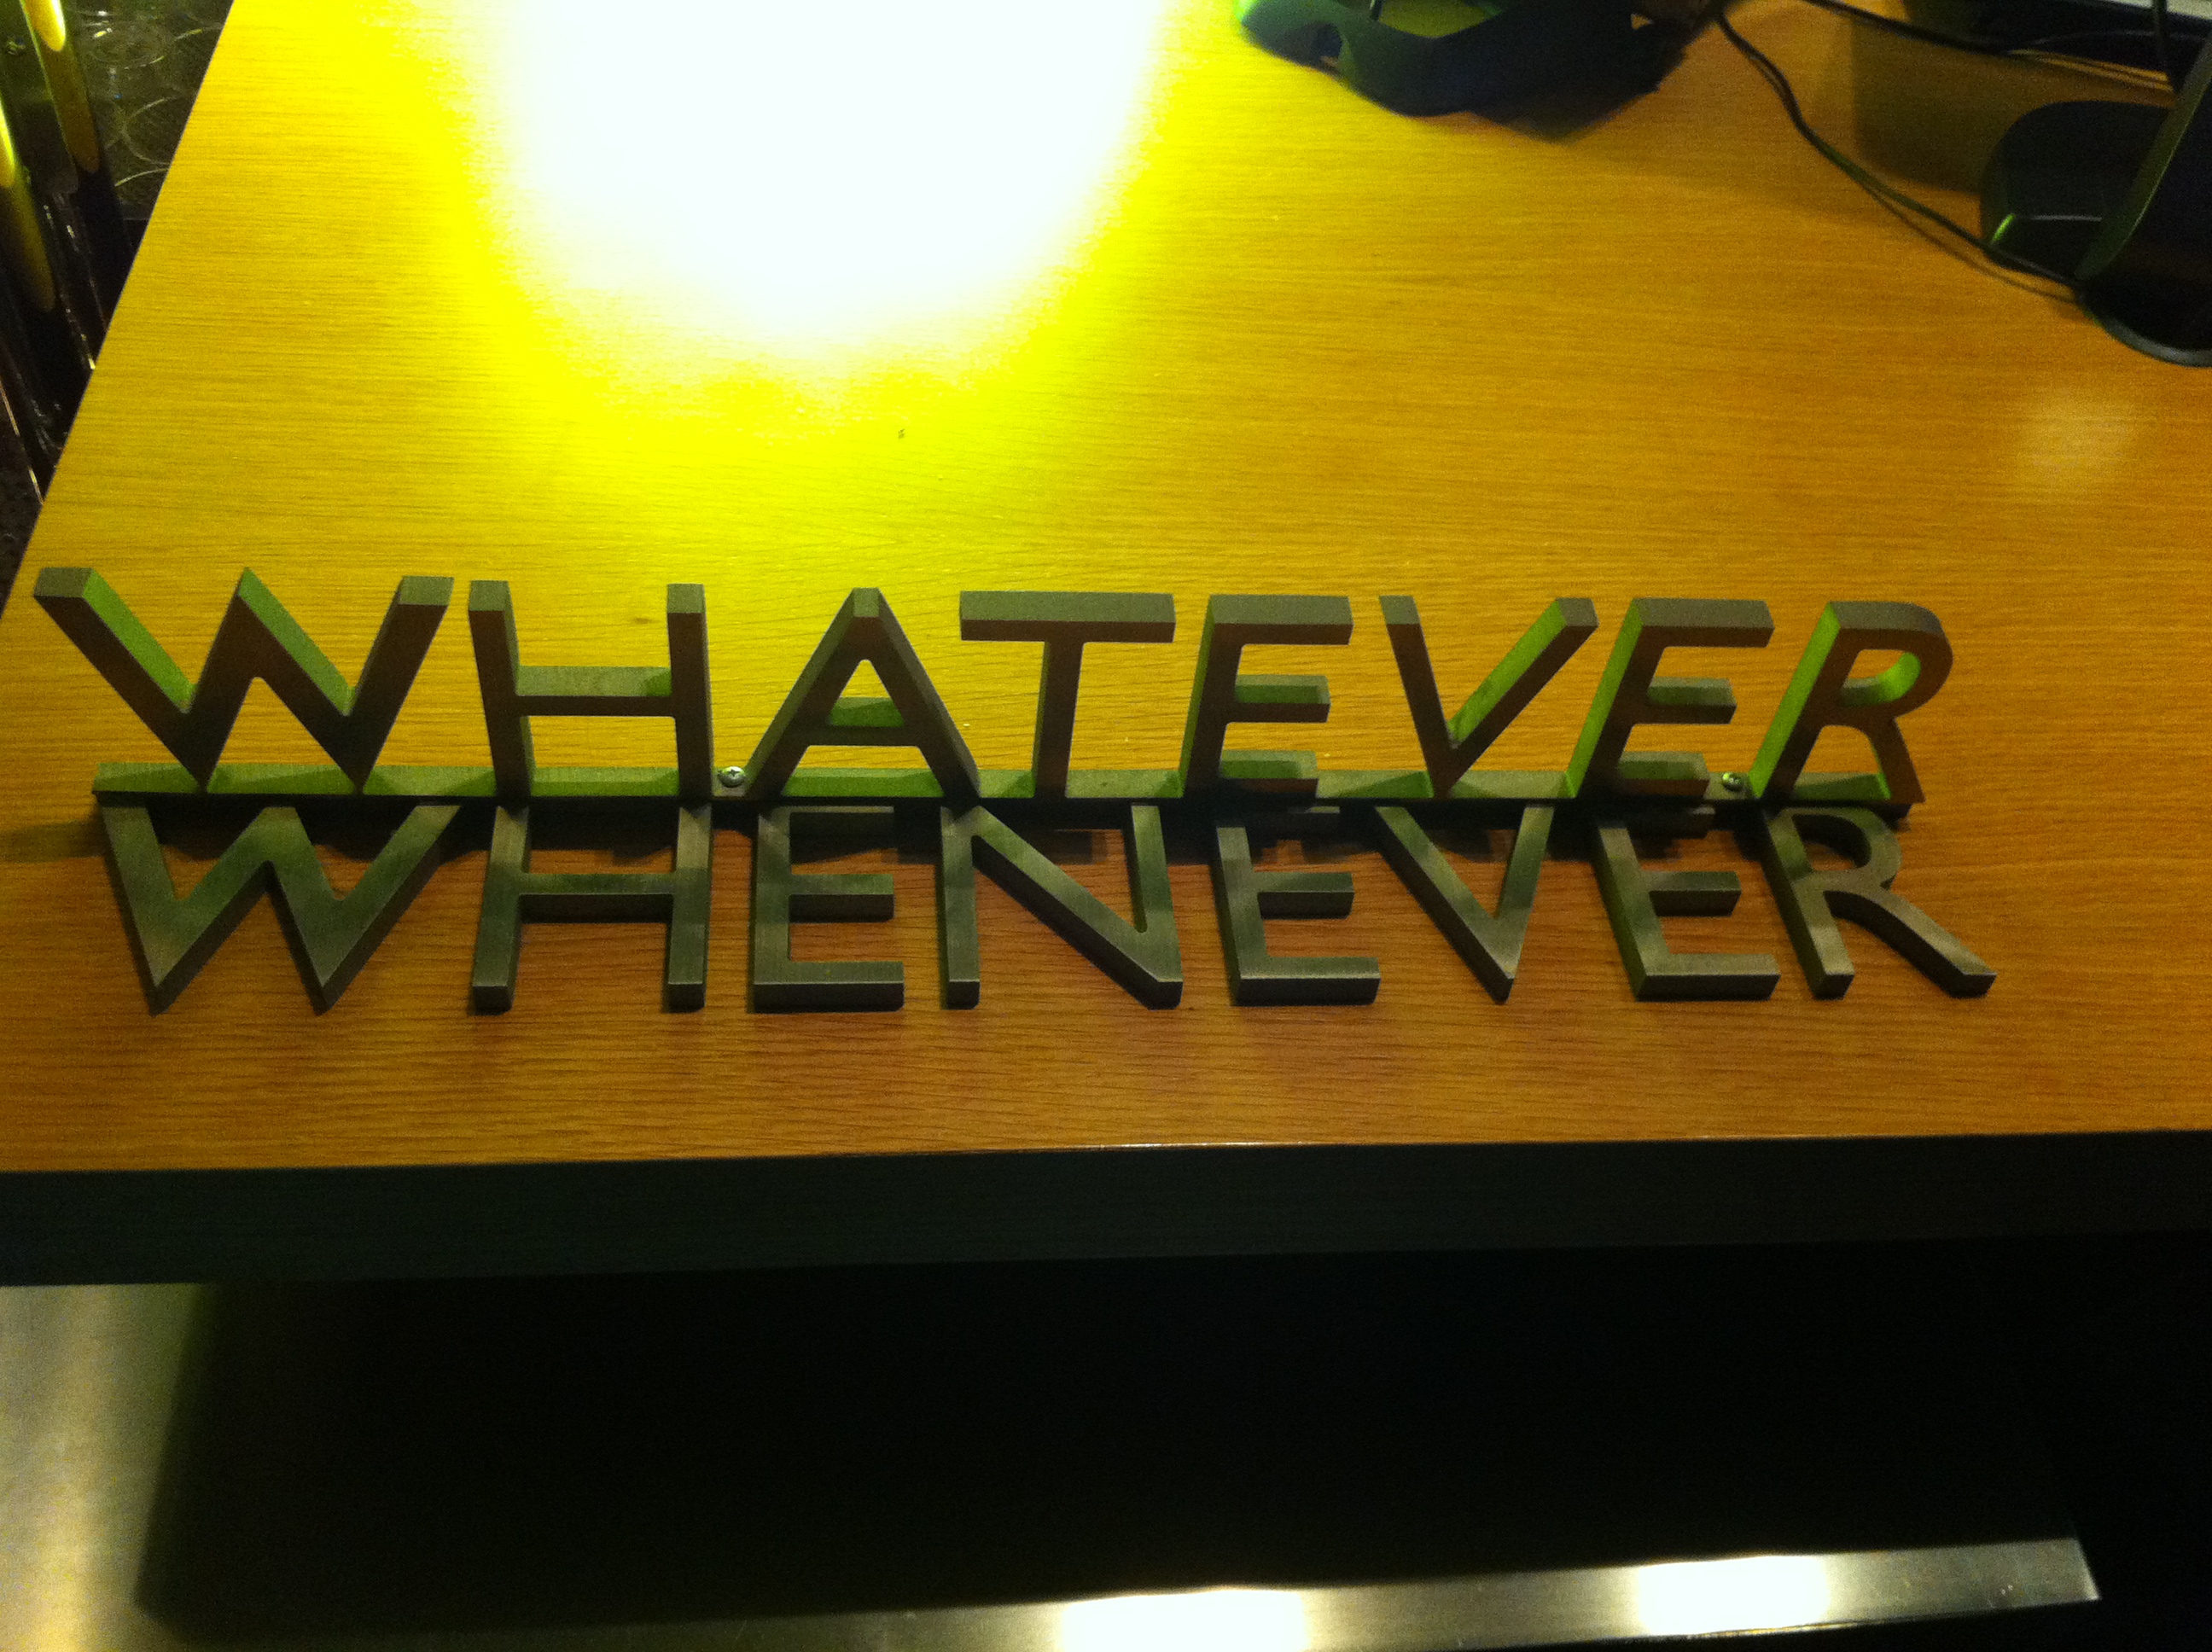 Whatever Whenever